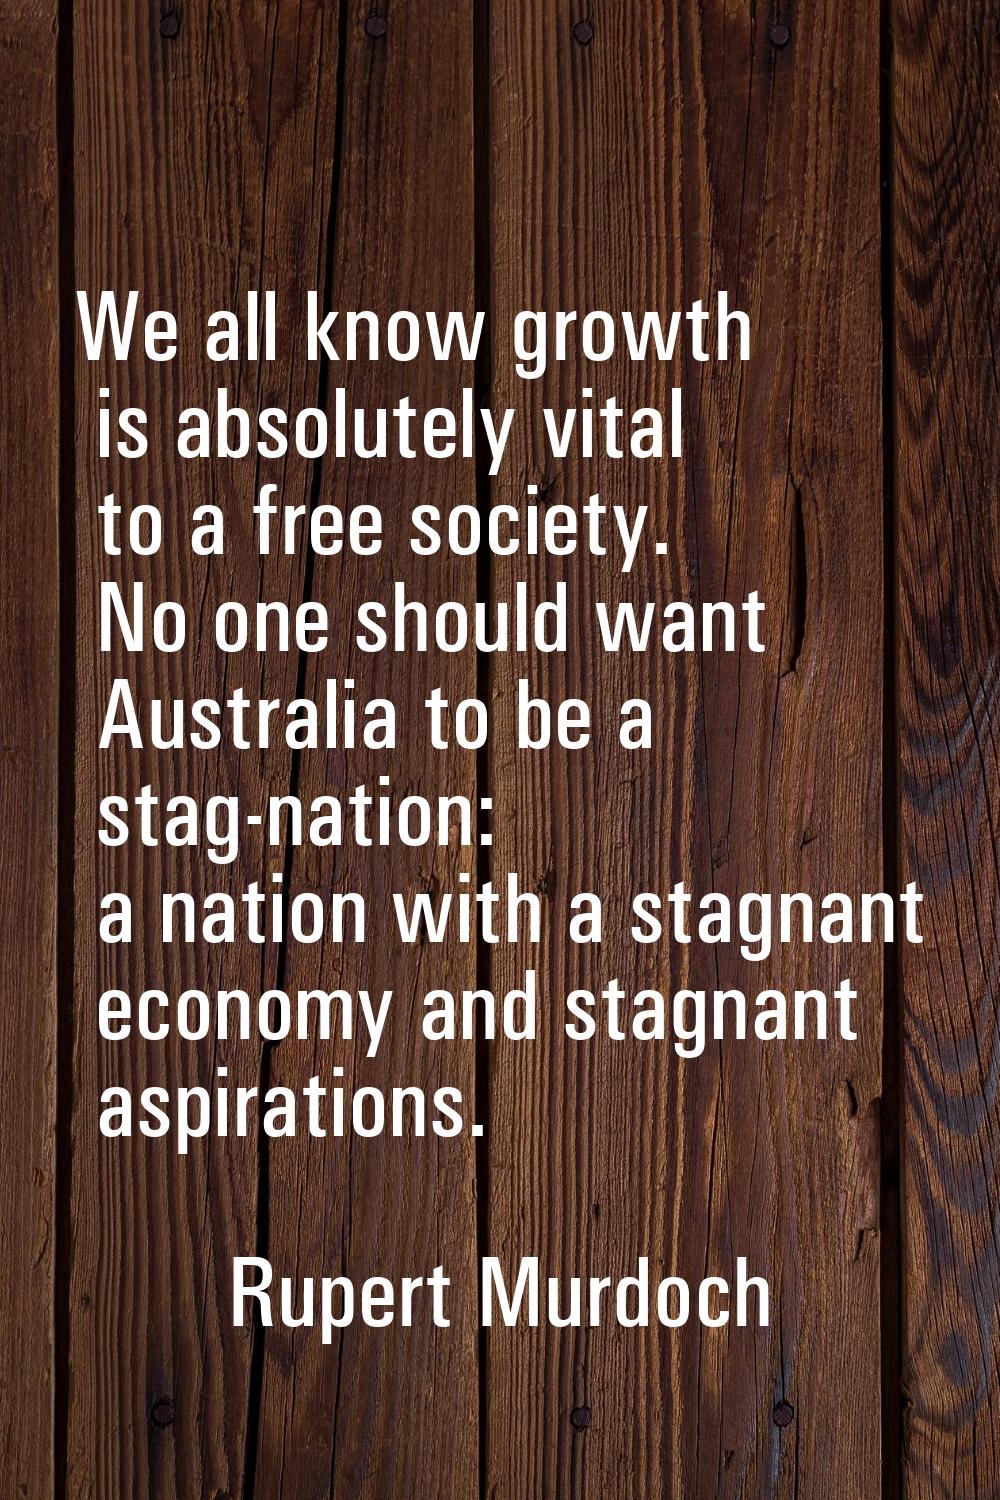 We all know growth is absolutely vital to a free society. No one should want Australia to be a stag